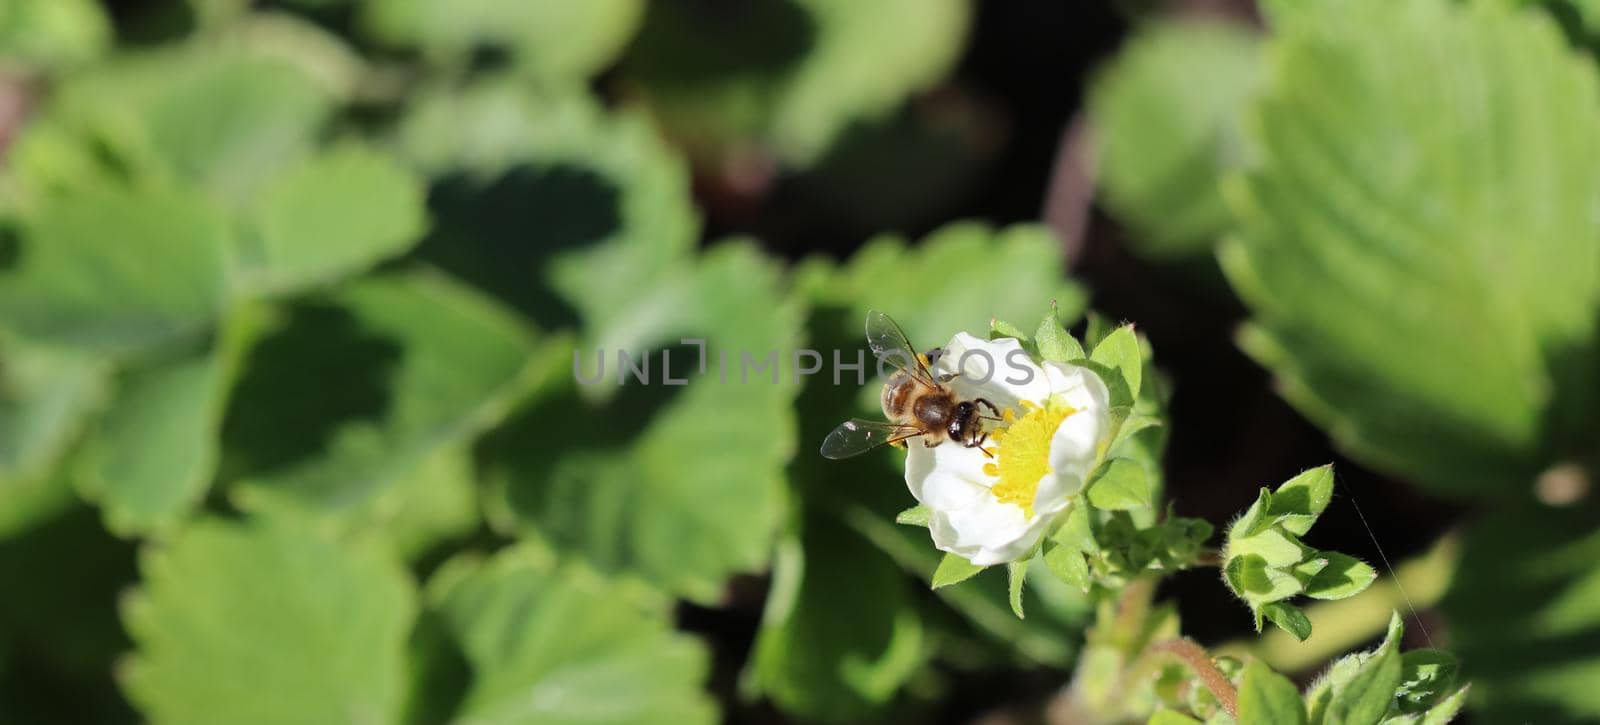 Blooming strawberry with bee on an organic farm by Olayola